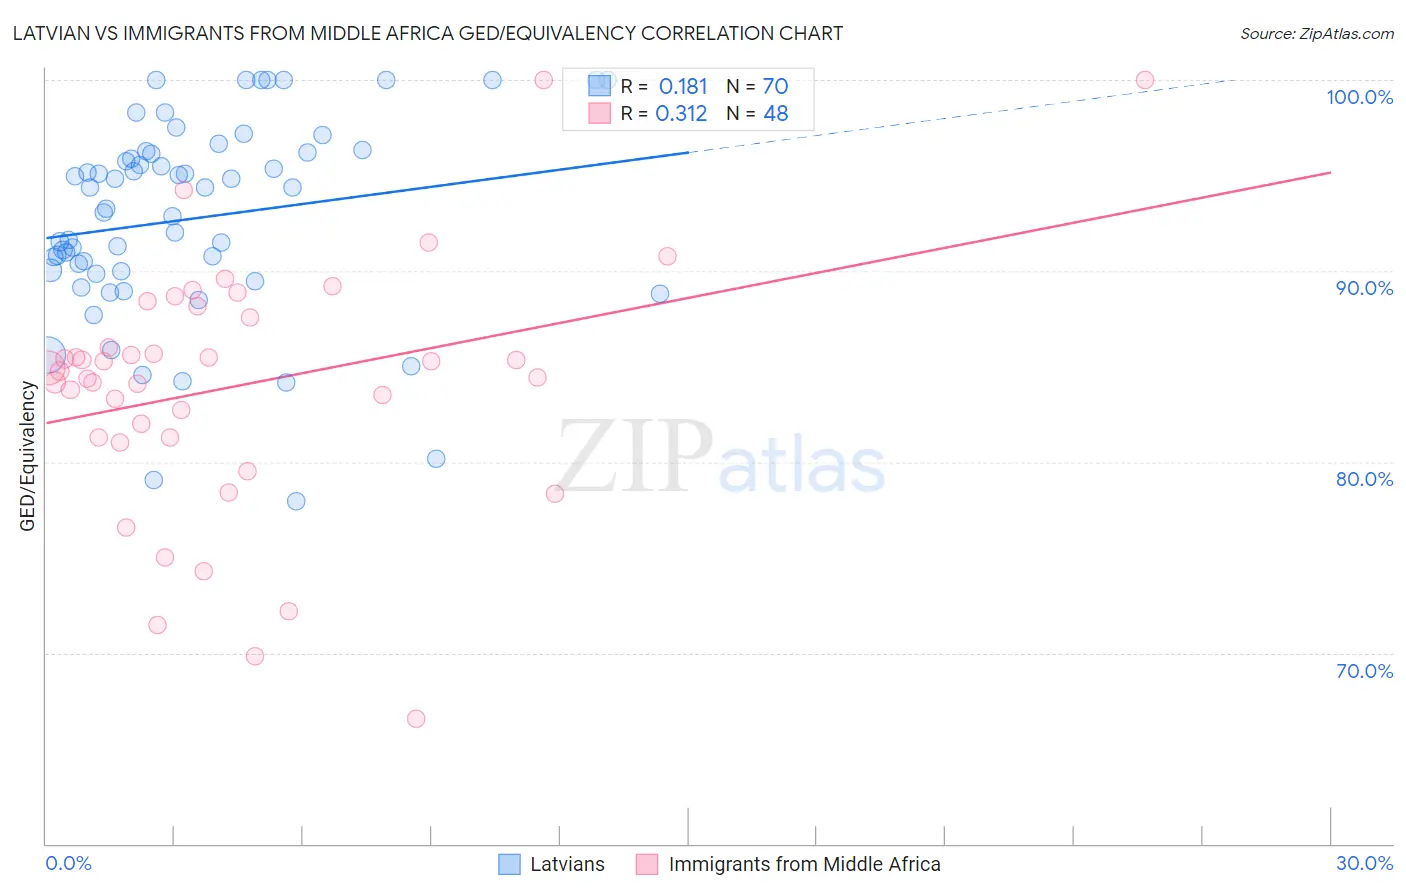 Latvian vs Immigrants from Middle Africa GED/Equivalency